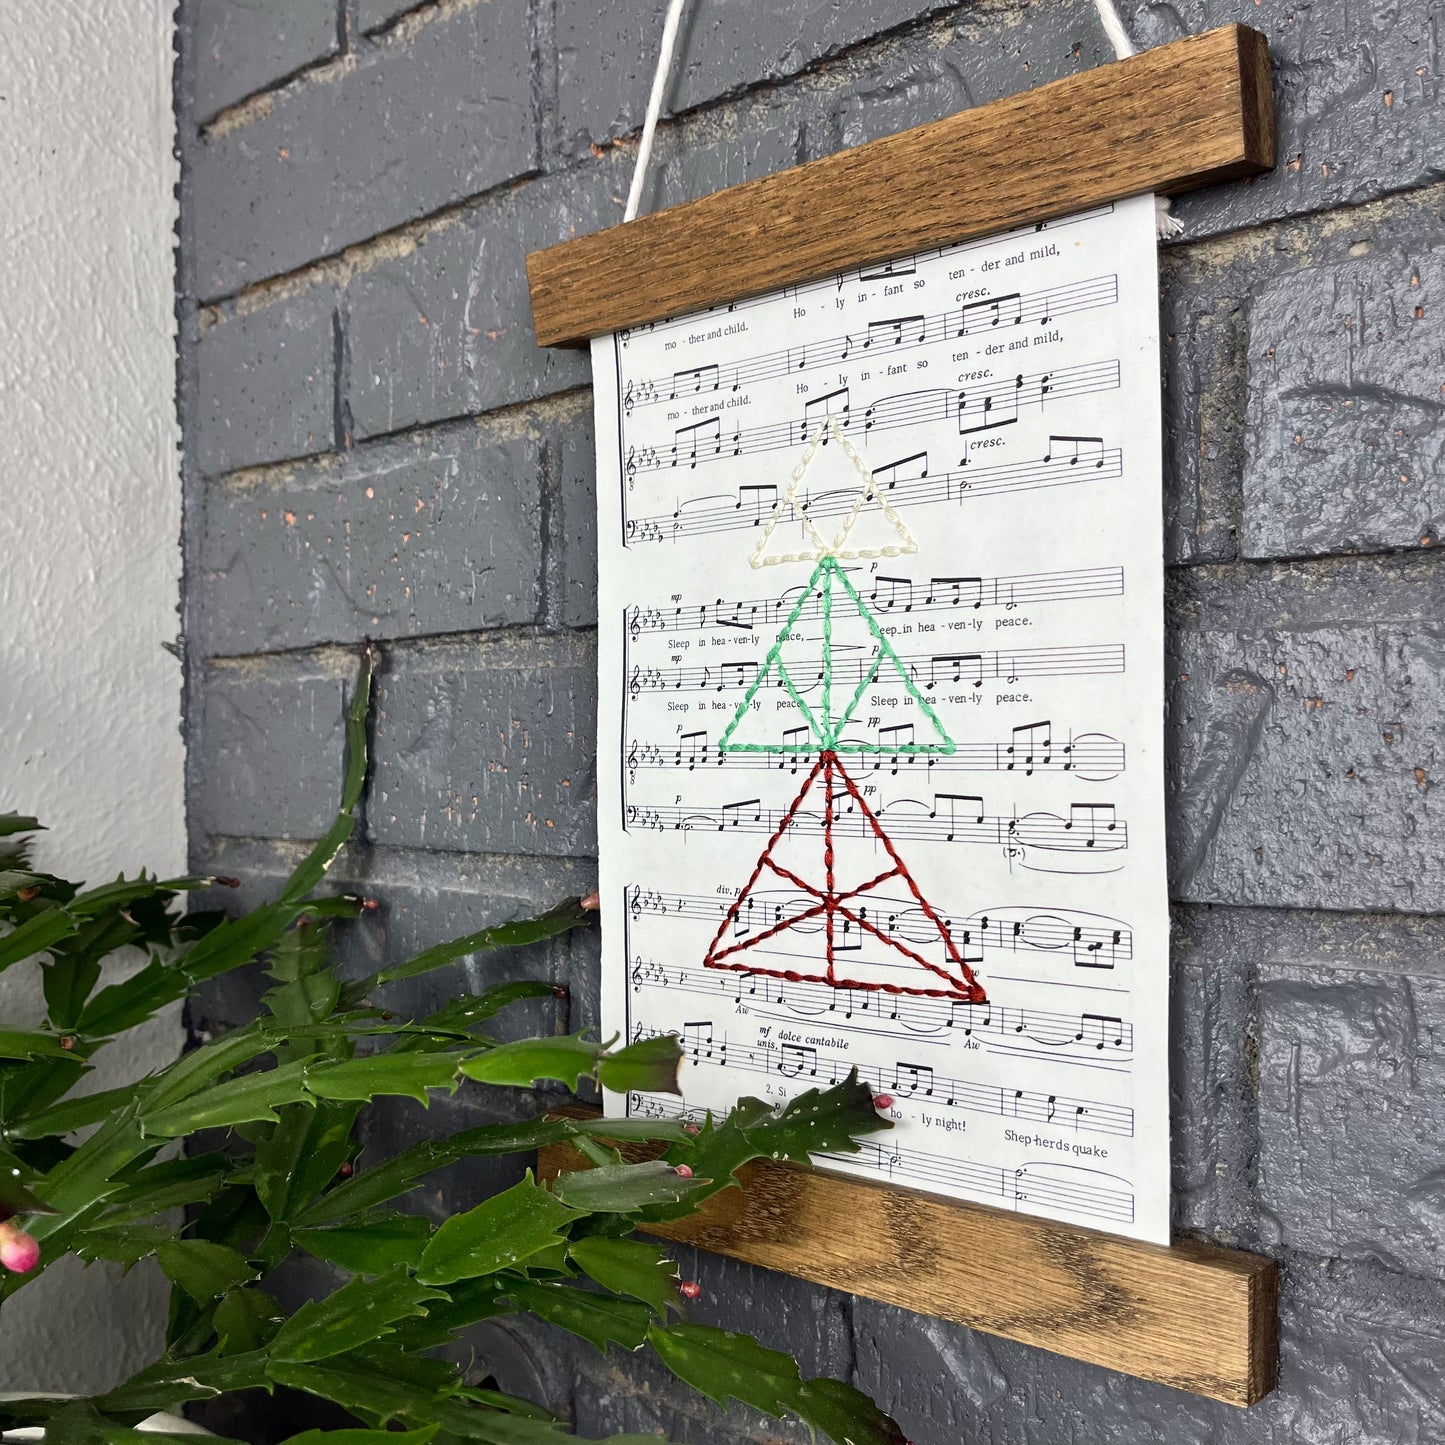 sheet music from a Christmas song, hand stitched over with a Christmas tree made from triangles, in red green and ivory thread, hanging in a wood magnetic frame on a grey brick wall, with a Christmas cactus in the foreground